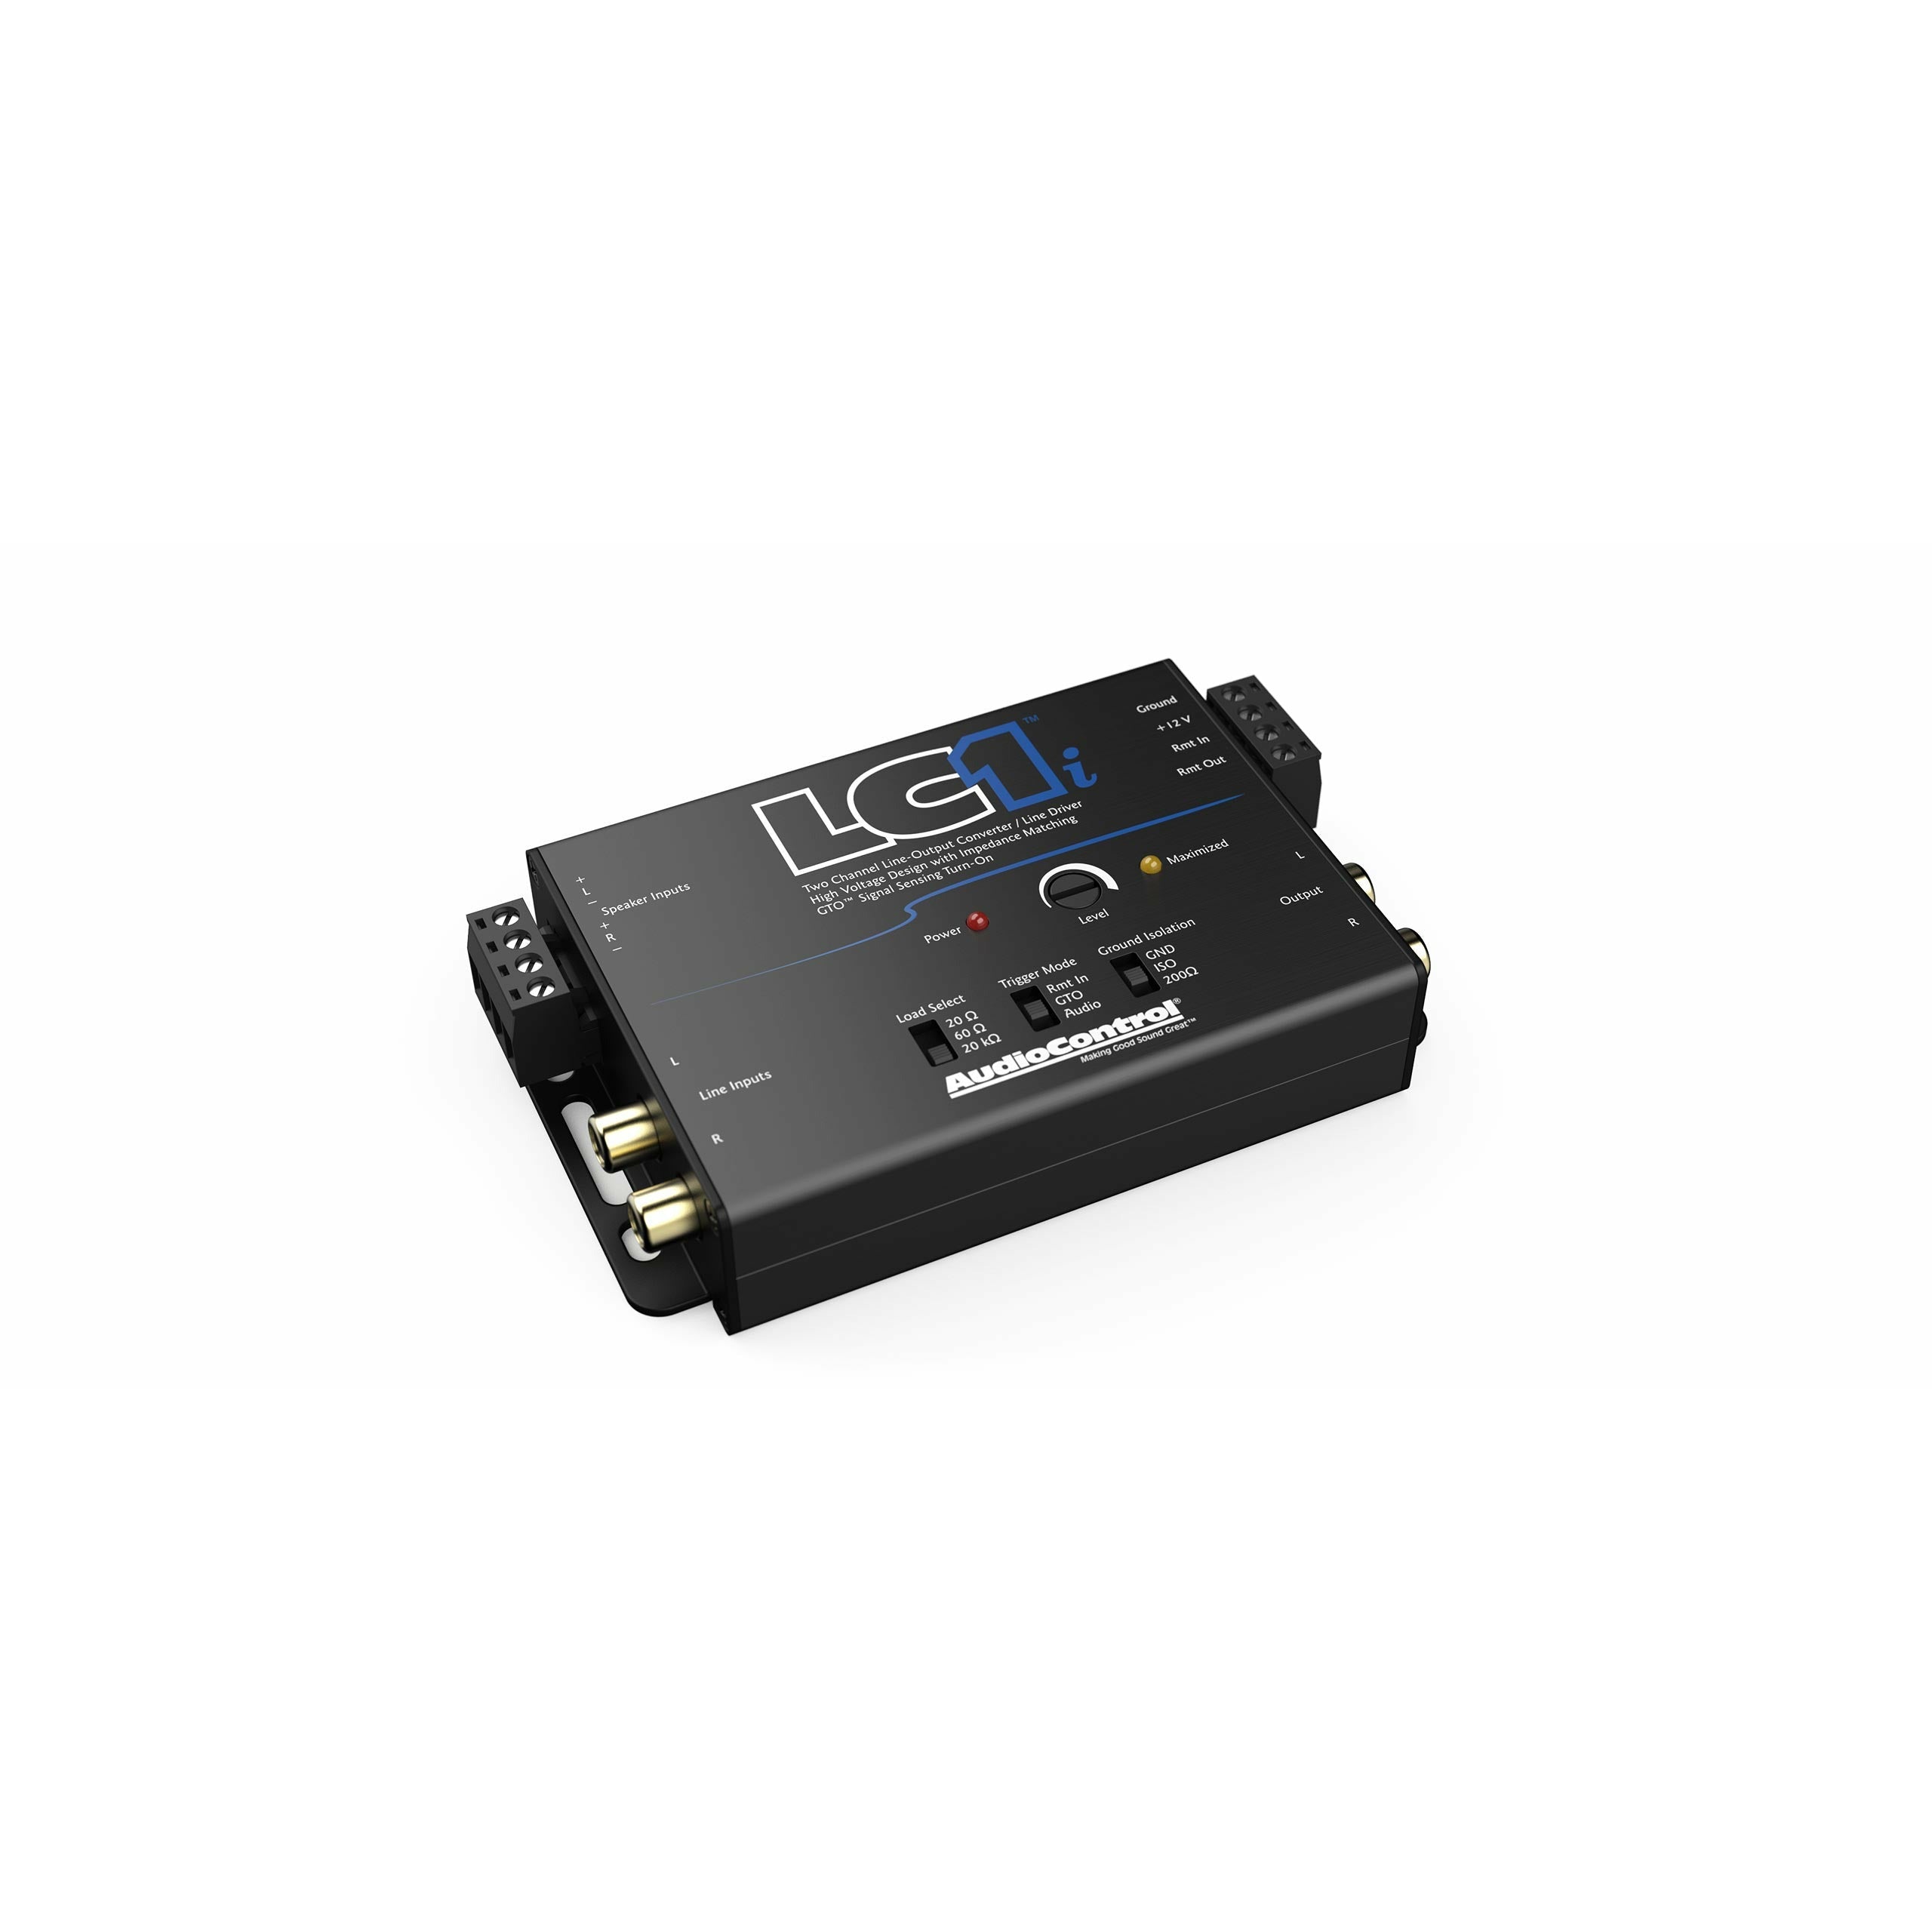 AudioControl LC1i 2-Channel Line Output Convertor